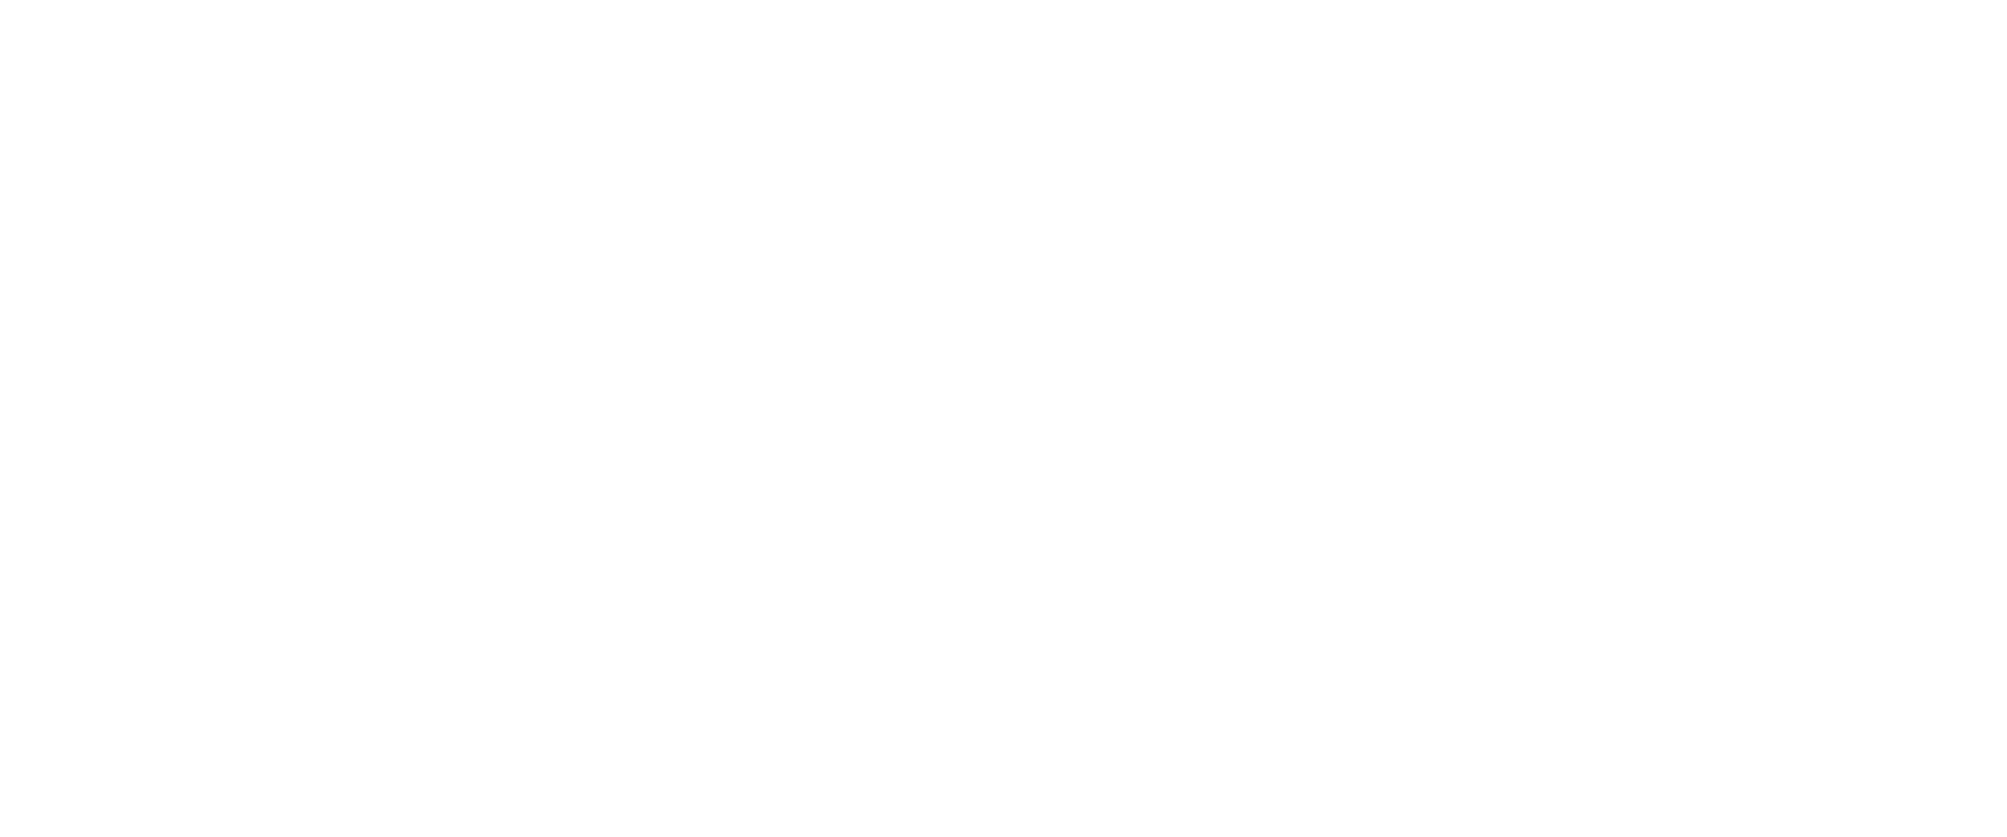 Digital + Technology Collective